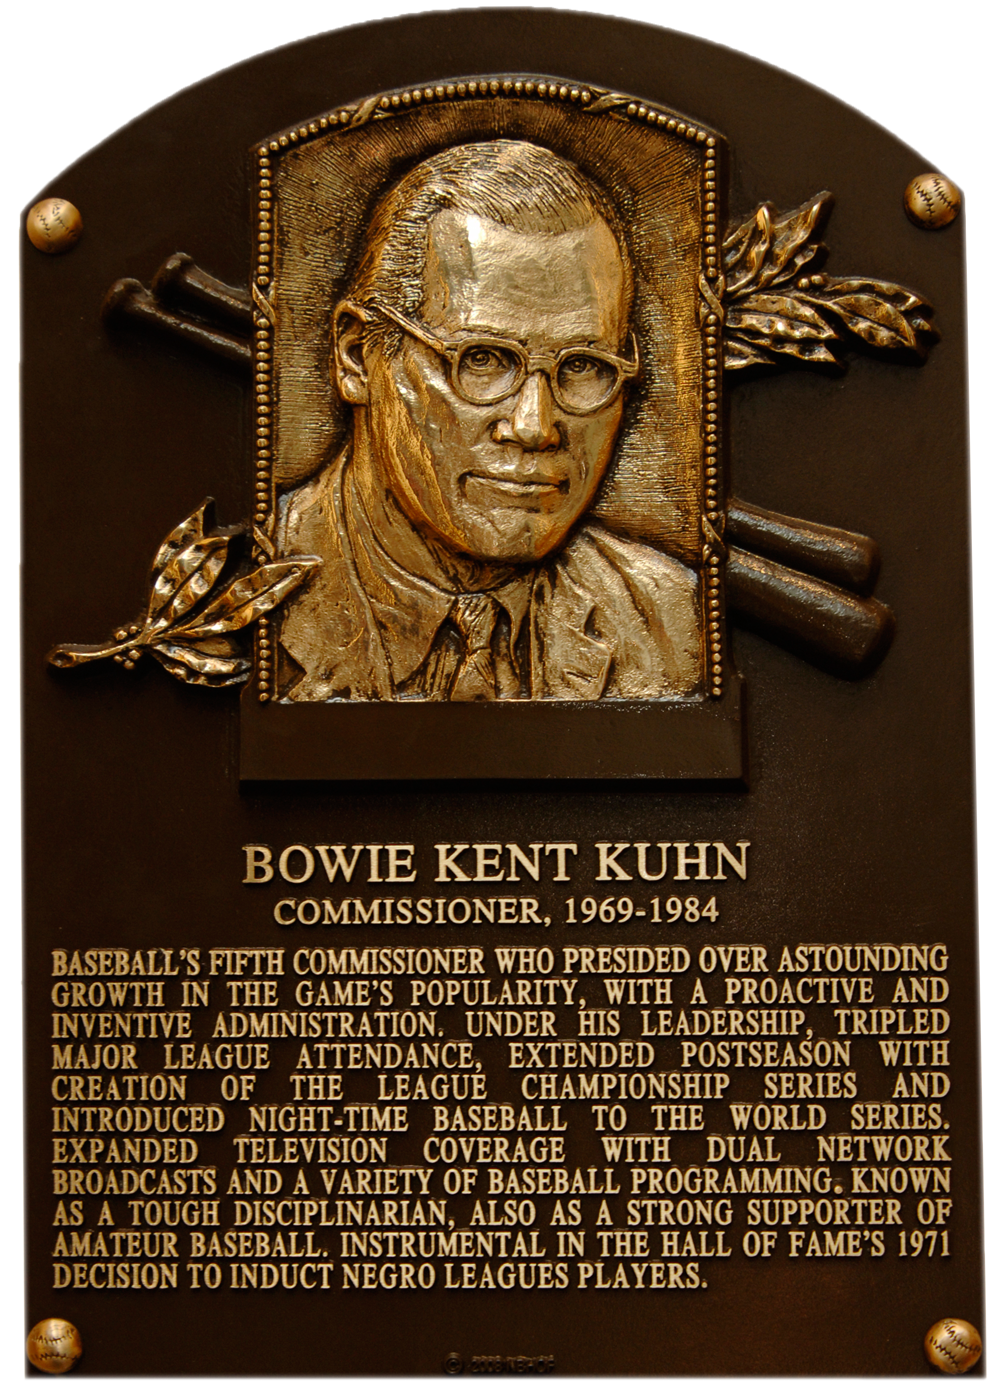 Bowie Kuhn Hall of Fame plaque